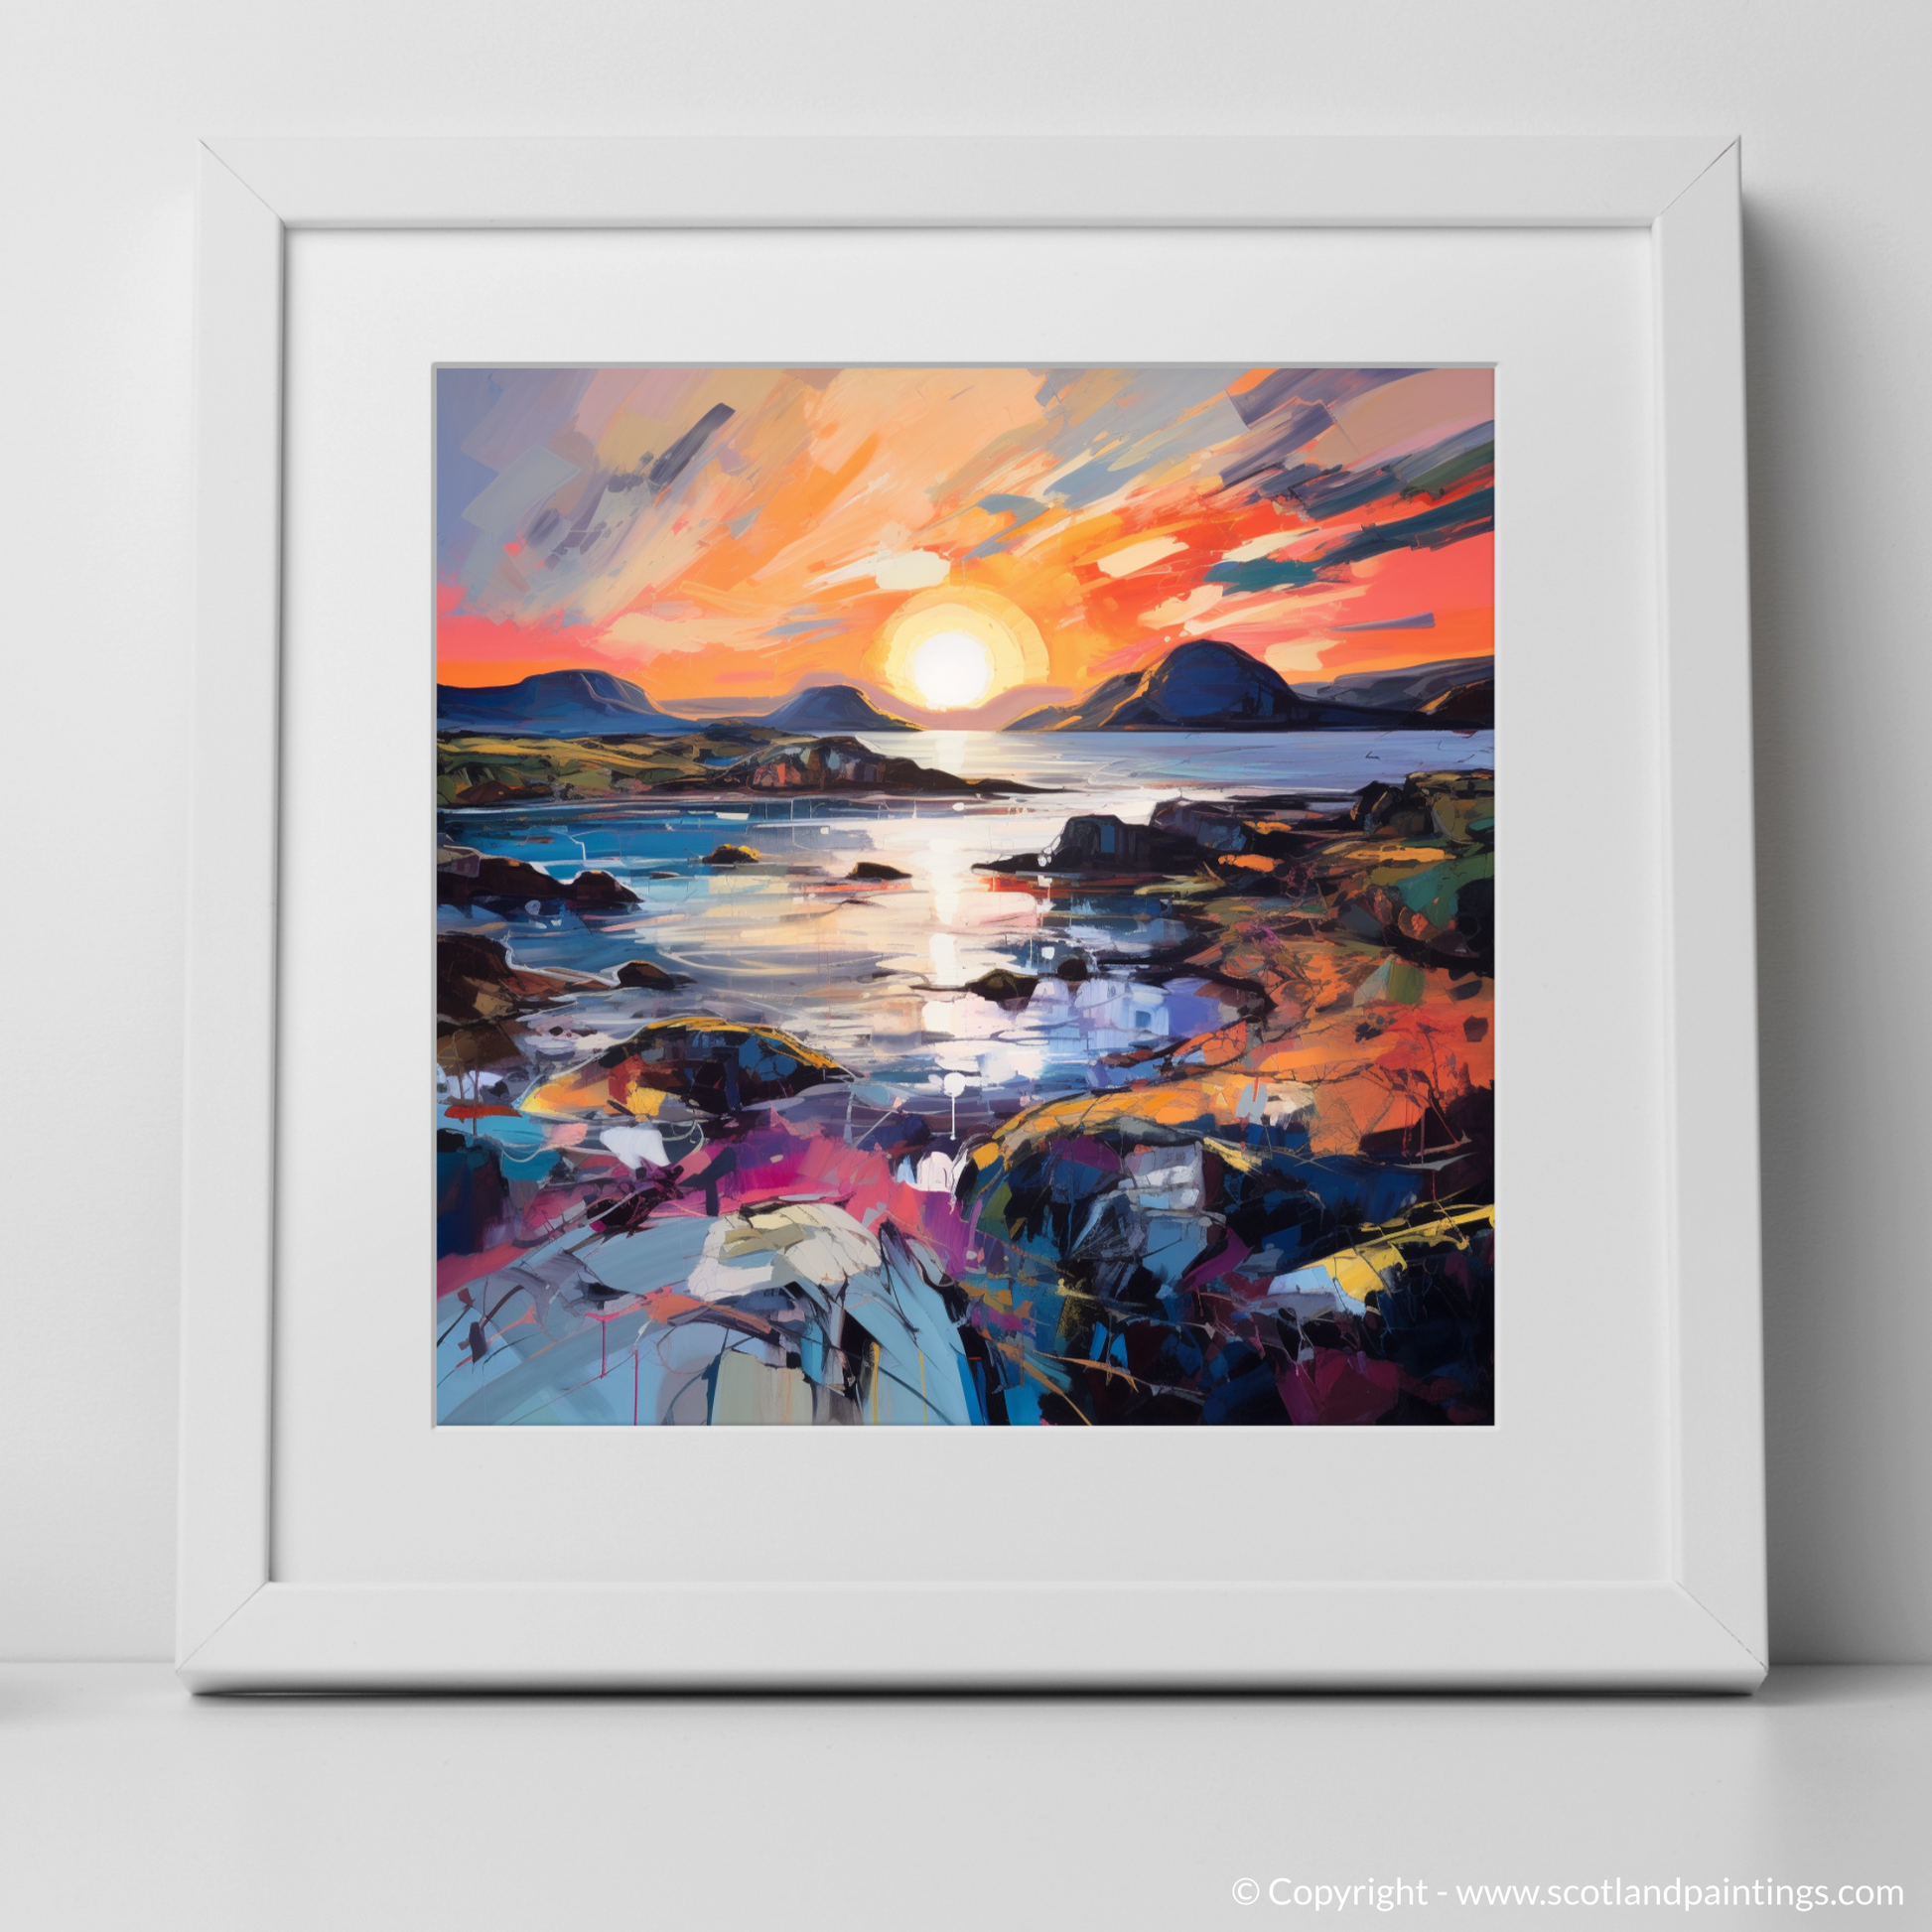 Art Print of Ardtun Bay at sunset with a white frame